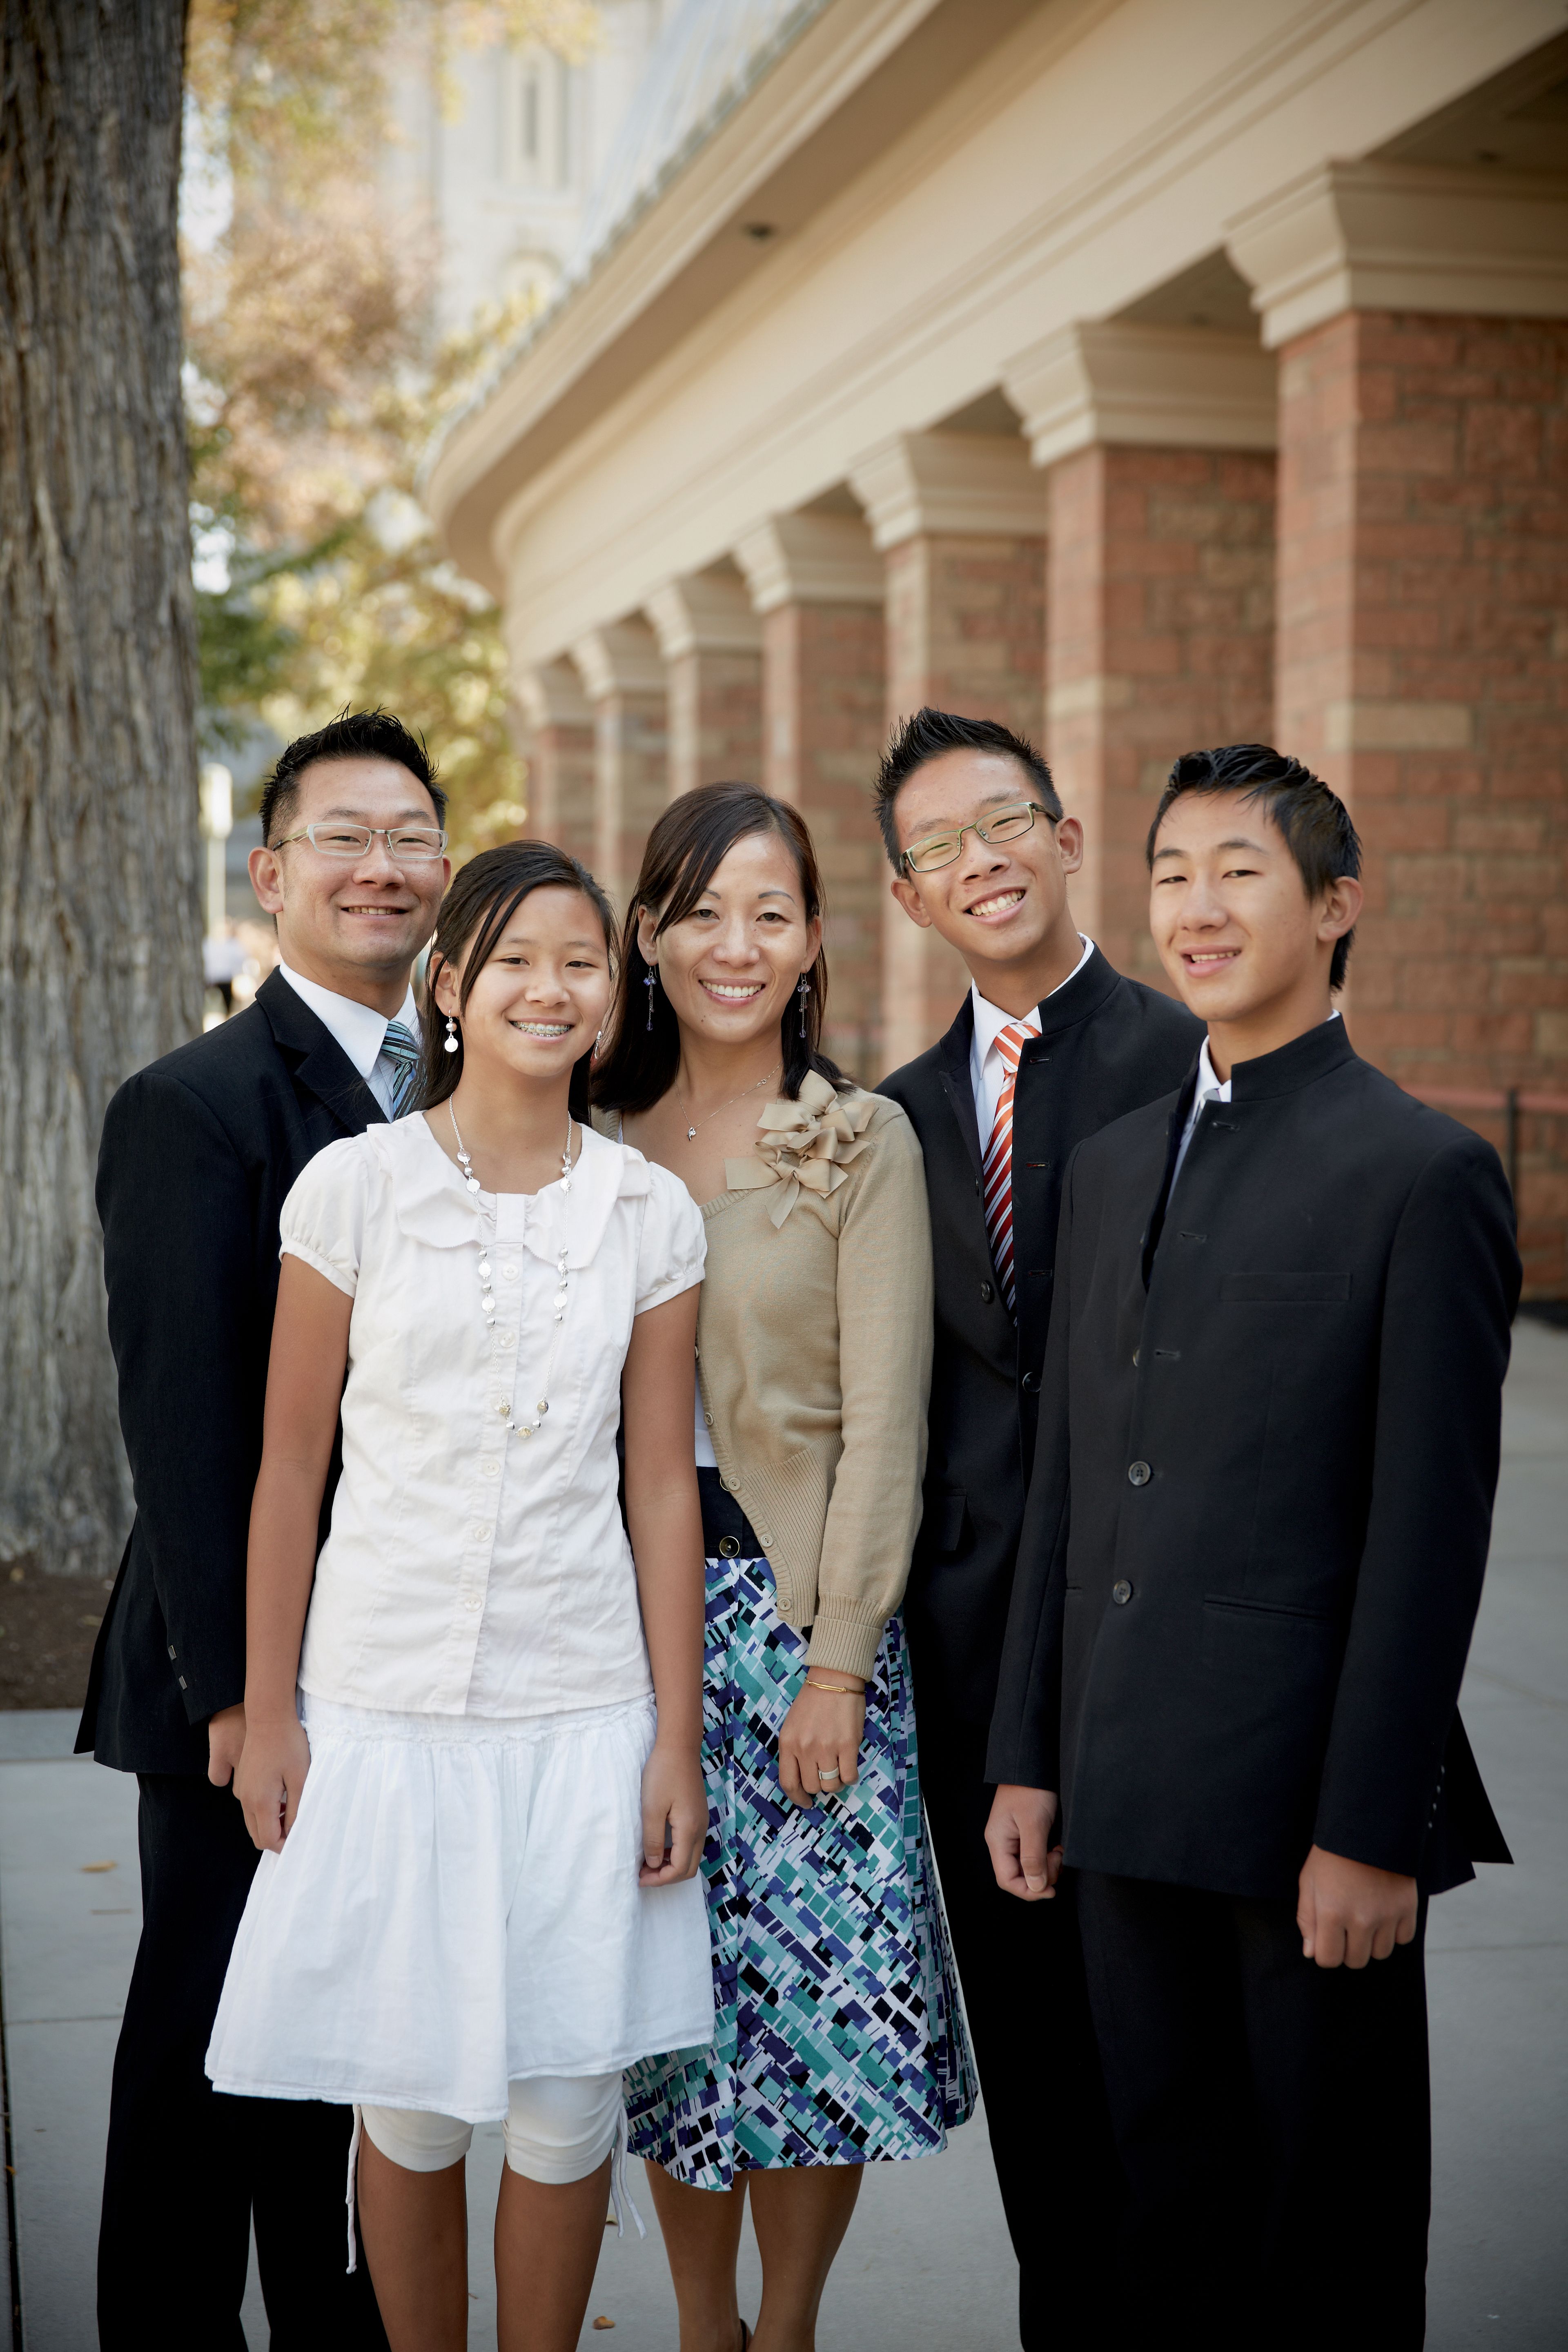 A family attends general conference in October of 2012.